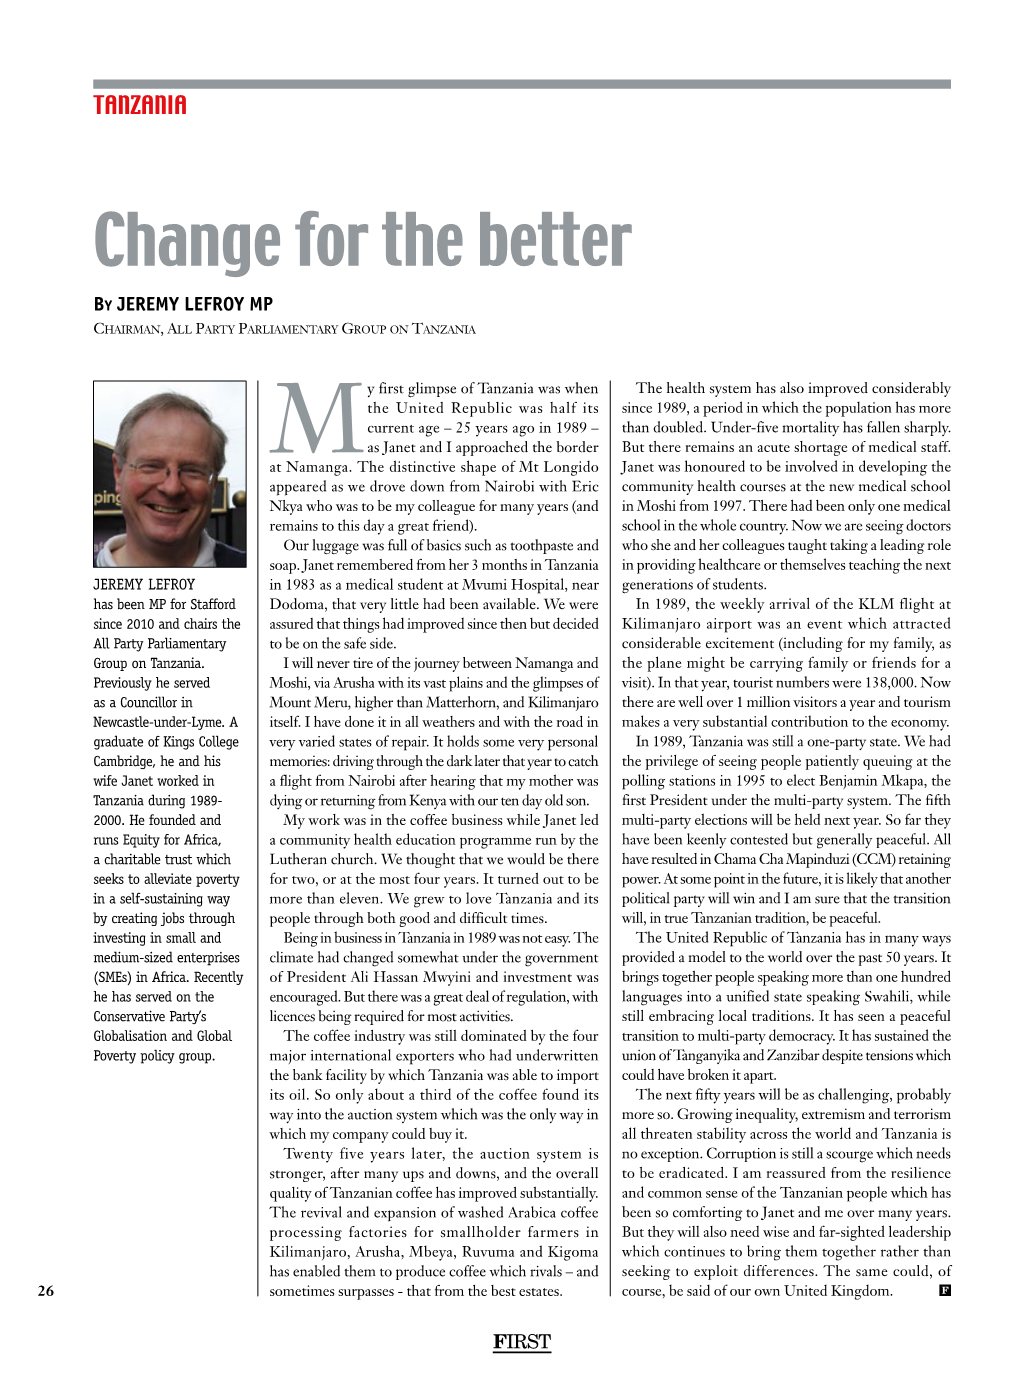 Change for the Better by JEREMY LEFROY MP Chairman, All Party Parliamentary Group on Tanzania